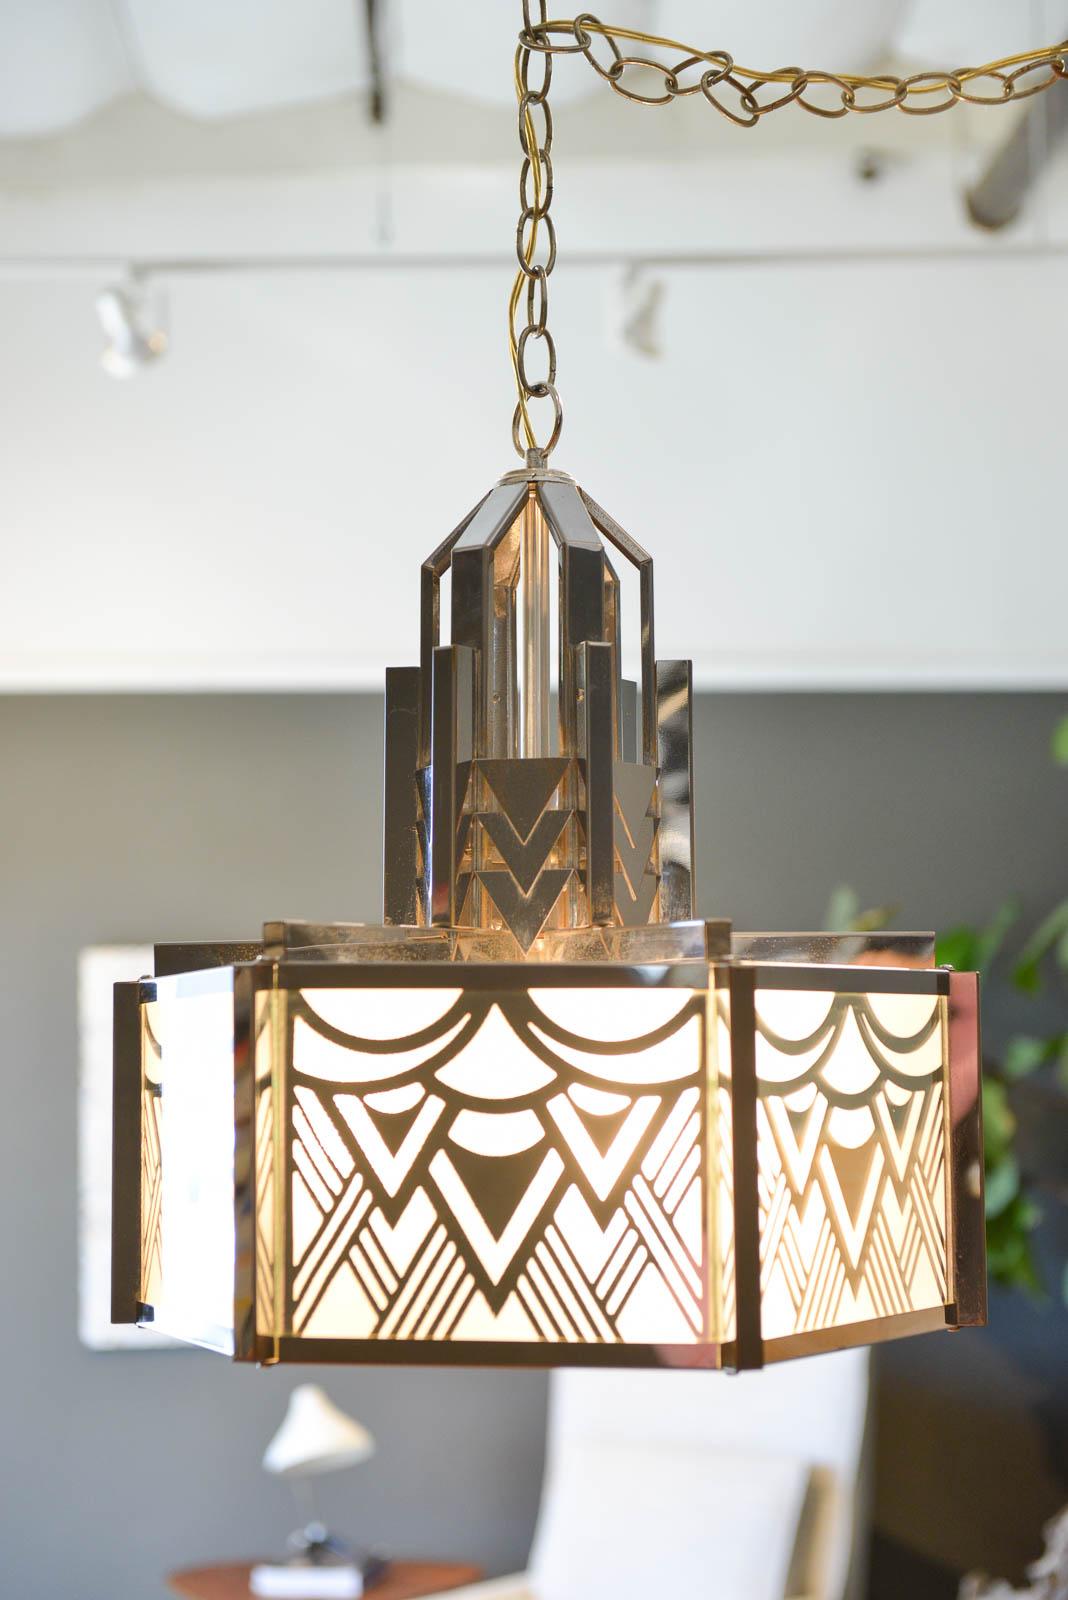 Mid-20th Century Art Deco Pendant Chandelier in Chrome and Glass